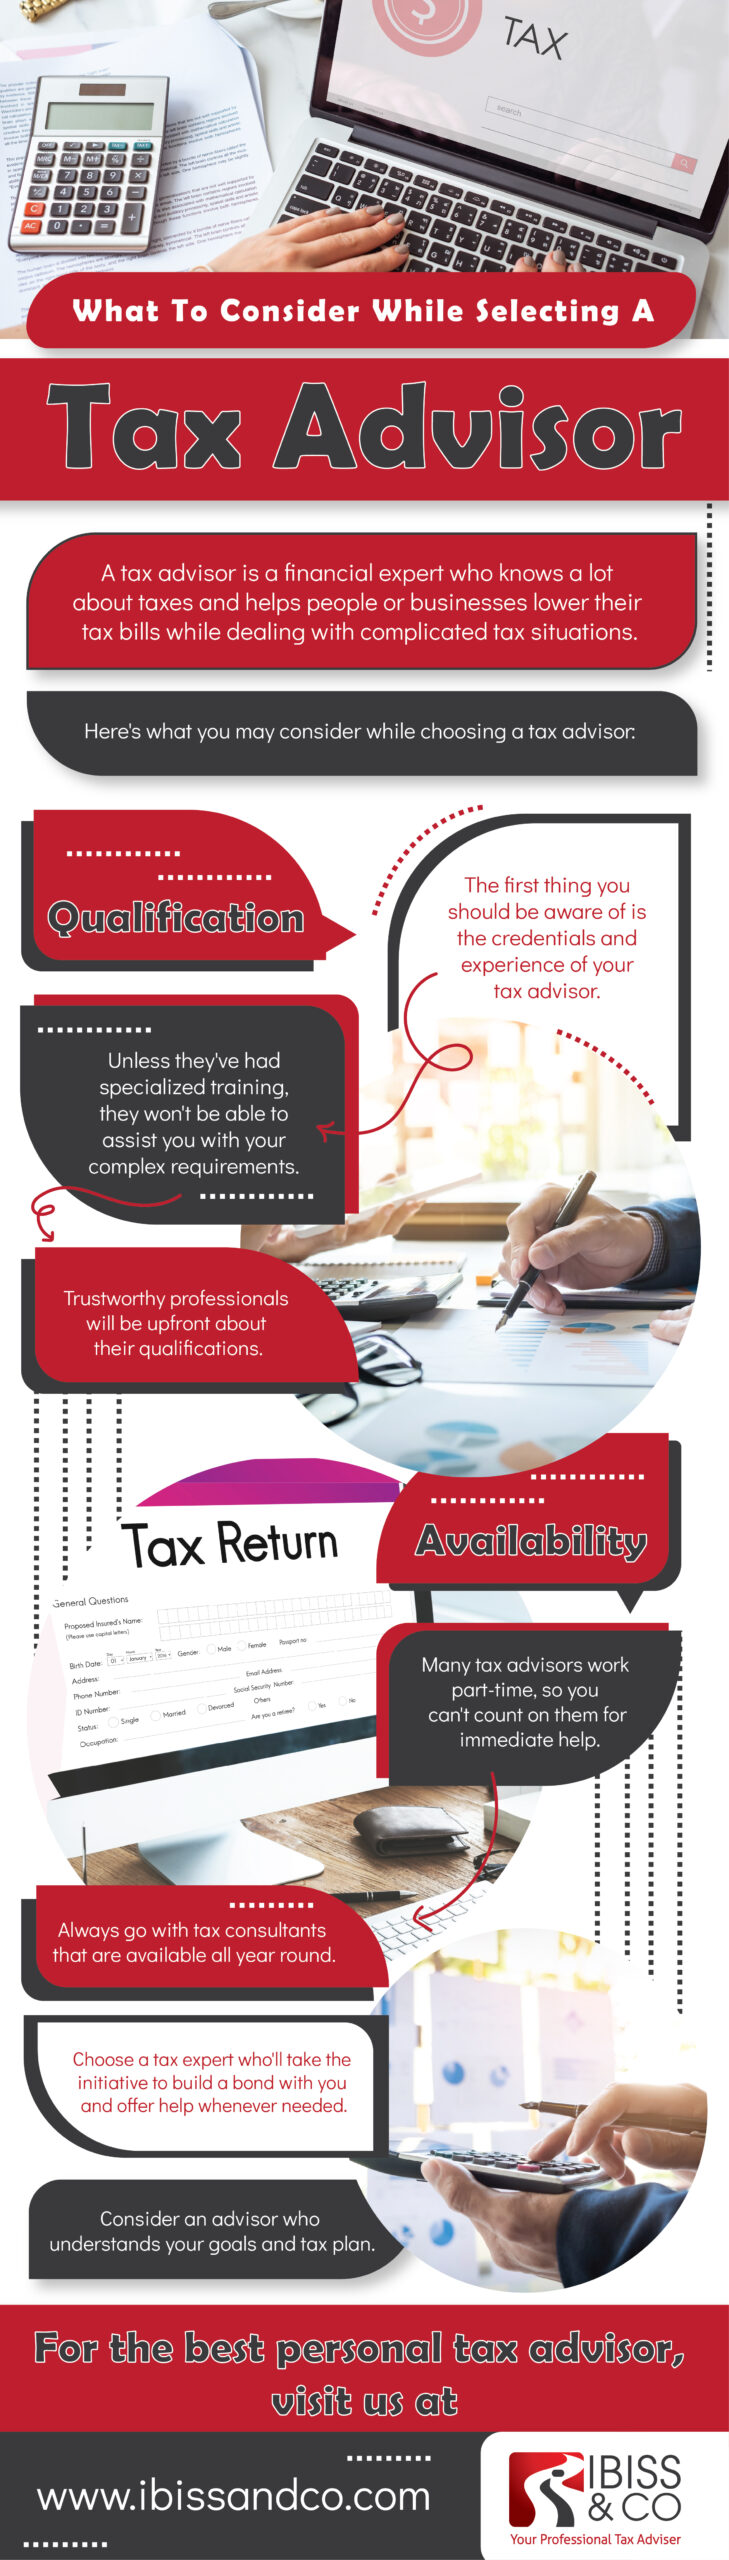 What to consider while selecting a tax advisor-INFOGRAPH